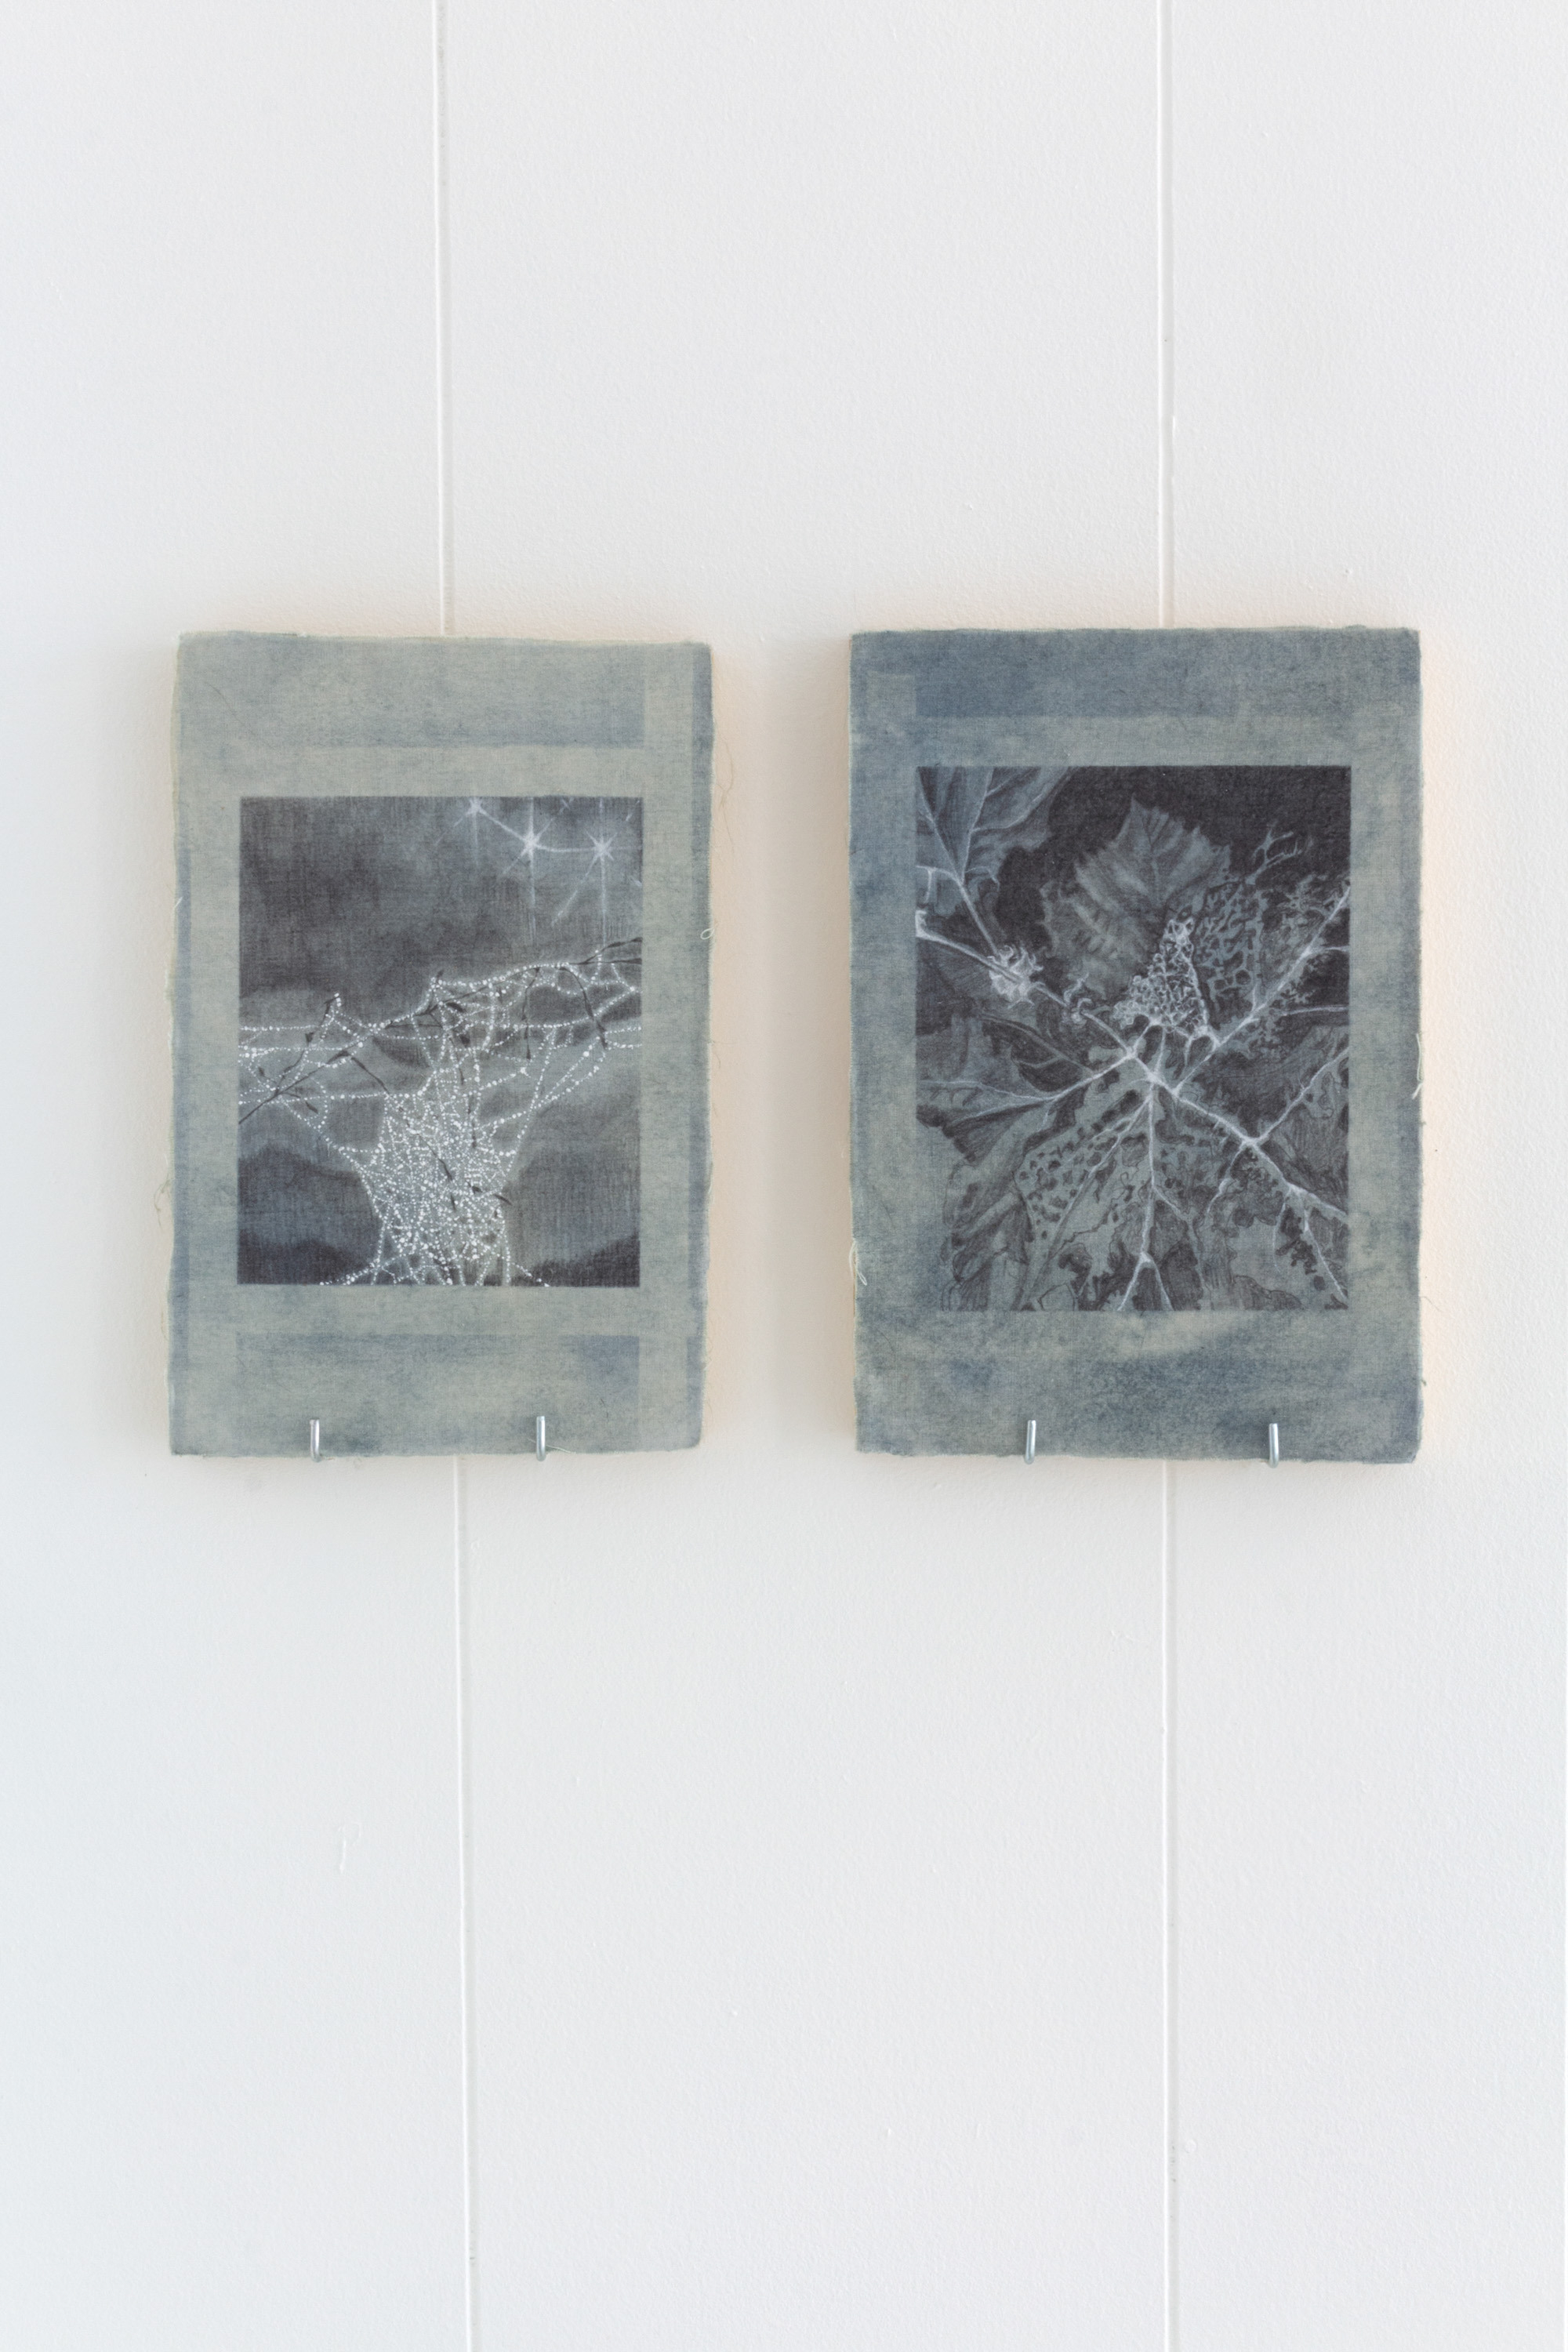 Ash Galka, river leaf study, 2022; spiderweb early early morning, 2022, Indigo dyed cotton and graphite on panel, 5.5 x 8 in each